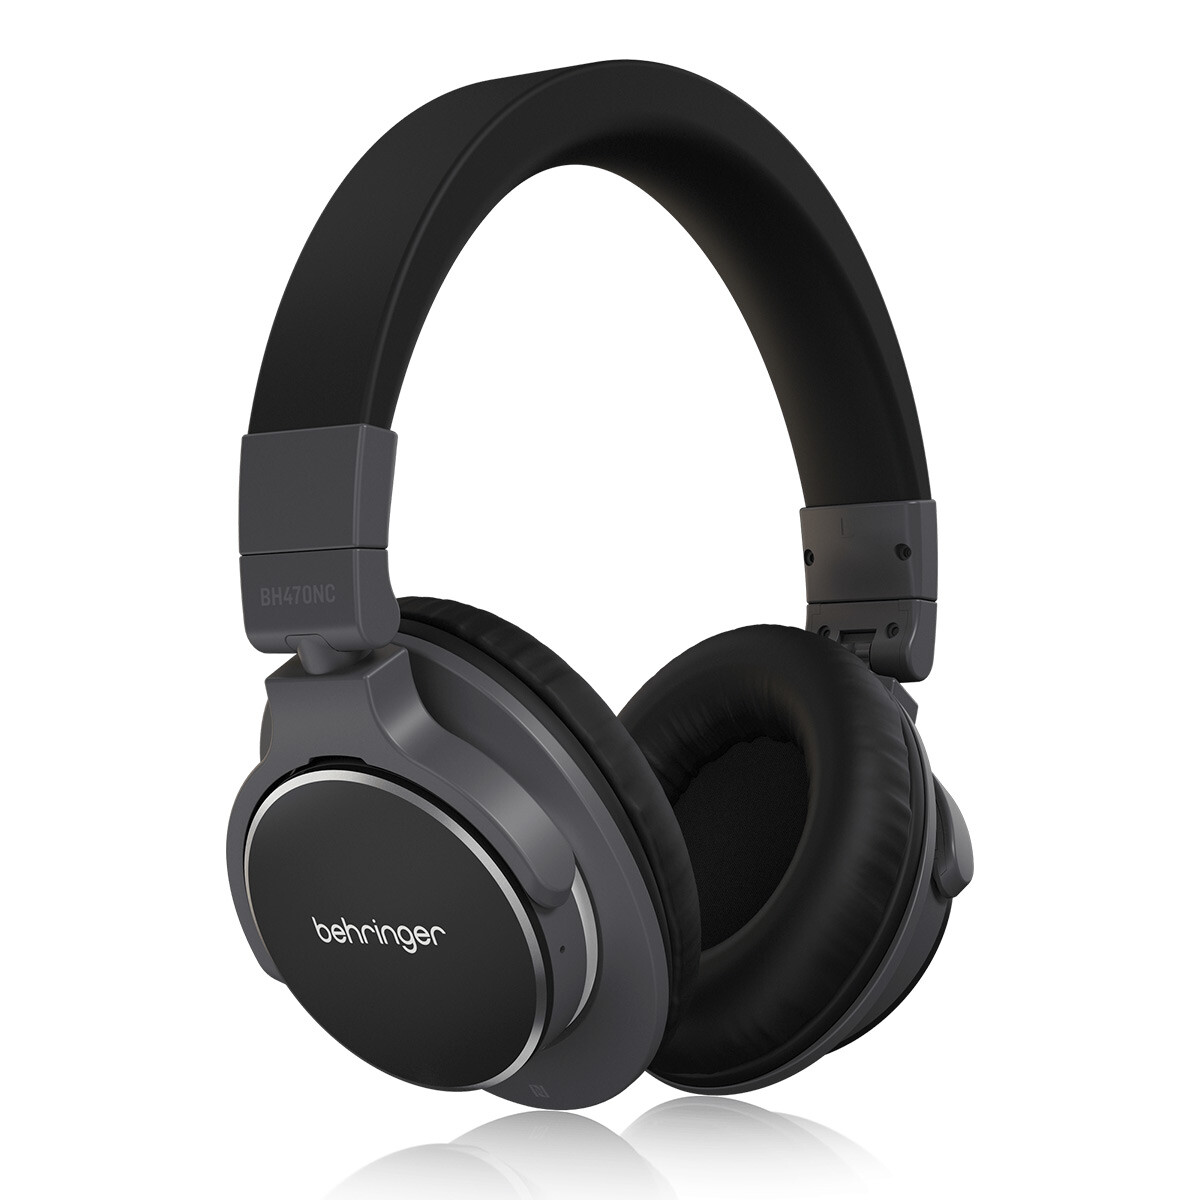 AURICULARES BEHRINGER BH470NC ACTIVE NOISE CANCELING 